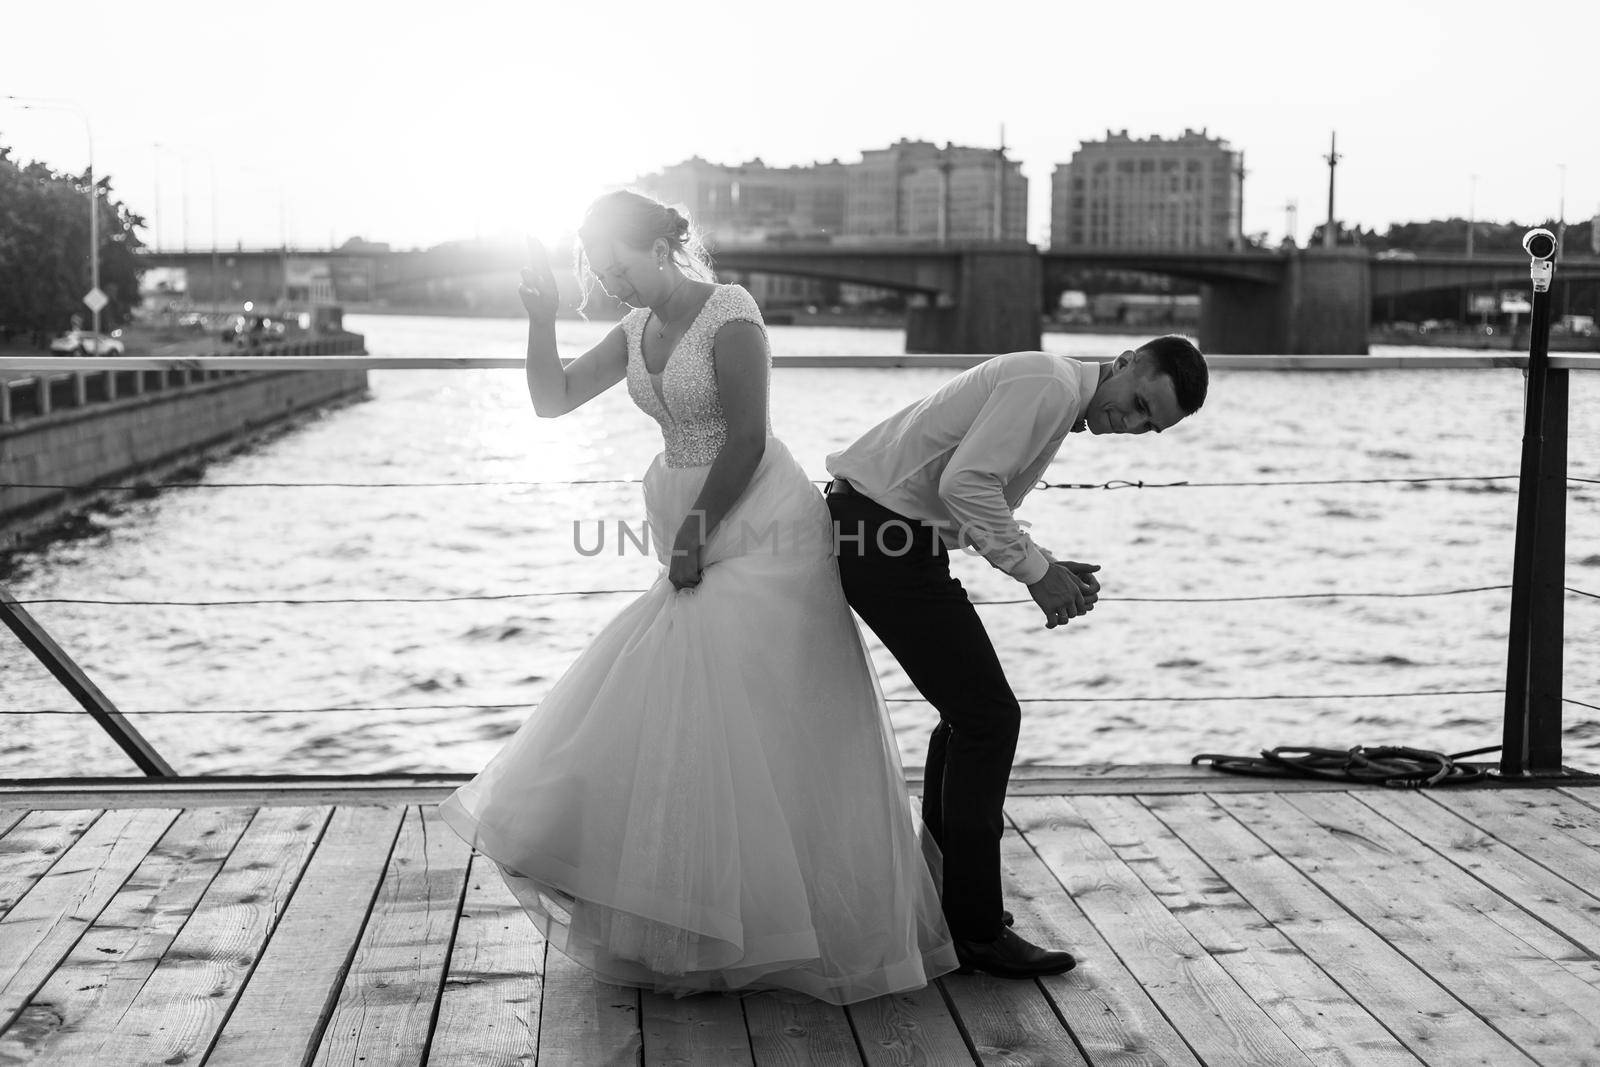 The dance of the bride and groom. Wedding article. A happy couple. Love. Photos for printed products. Romance